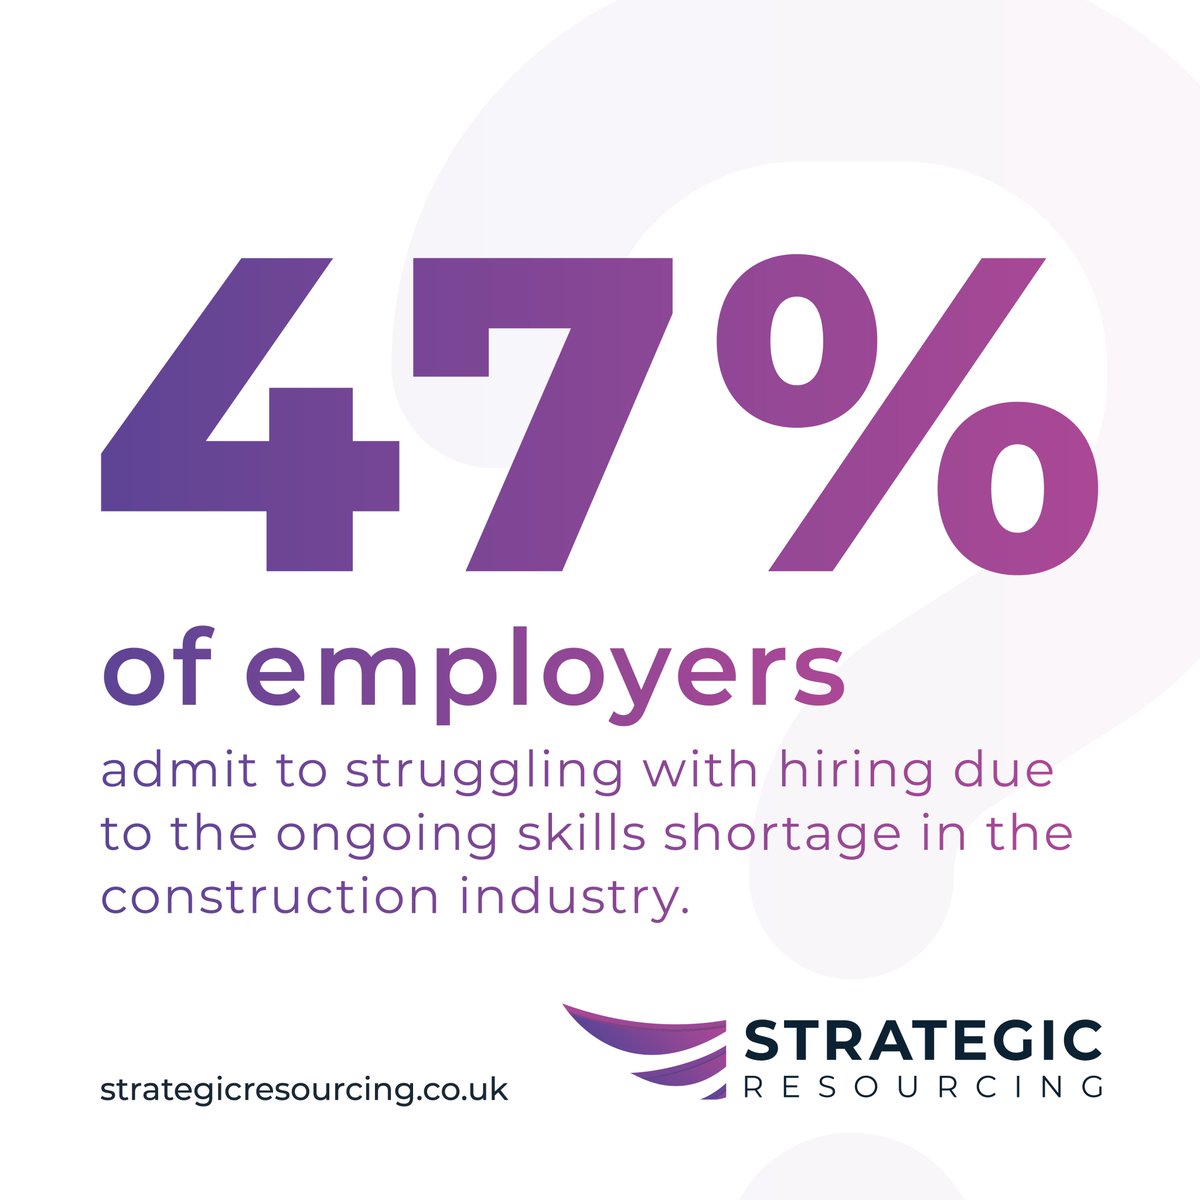 🚧 It's #ConstructionSkillsShortage week! 

Did you know this crucial initiative was introduced by @onthetoolstv to tackle the pressing skills shortage in the UK construction industry?

We've dived into these insights, uncovering some shocking statistics 👇👇👇

#ClosingTheGap